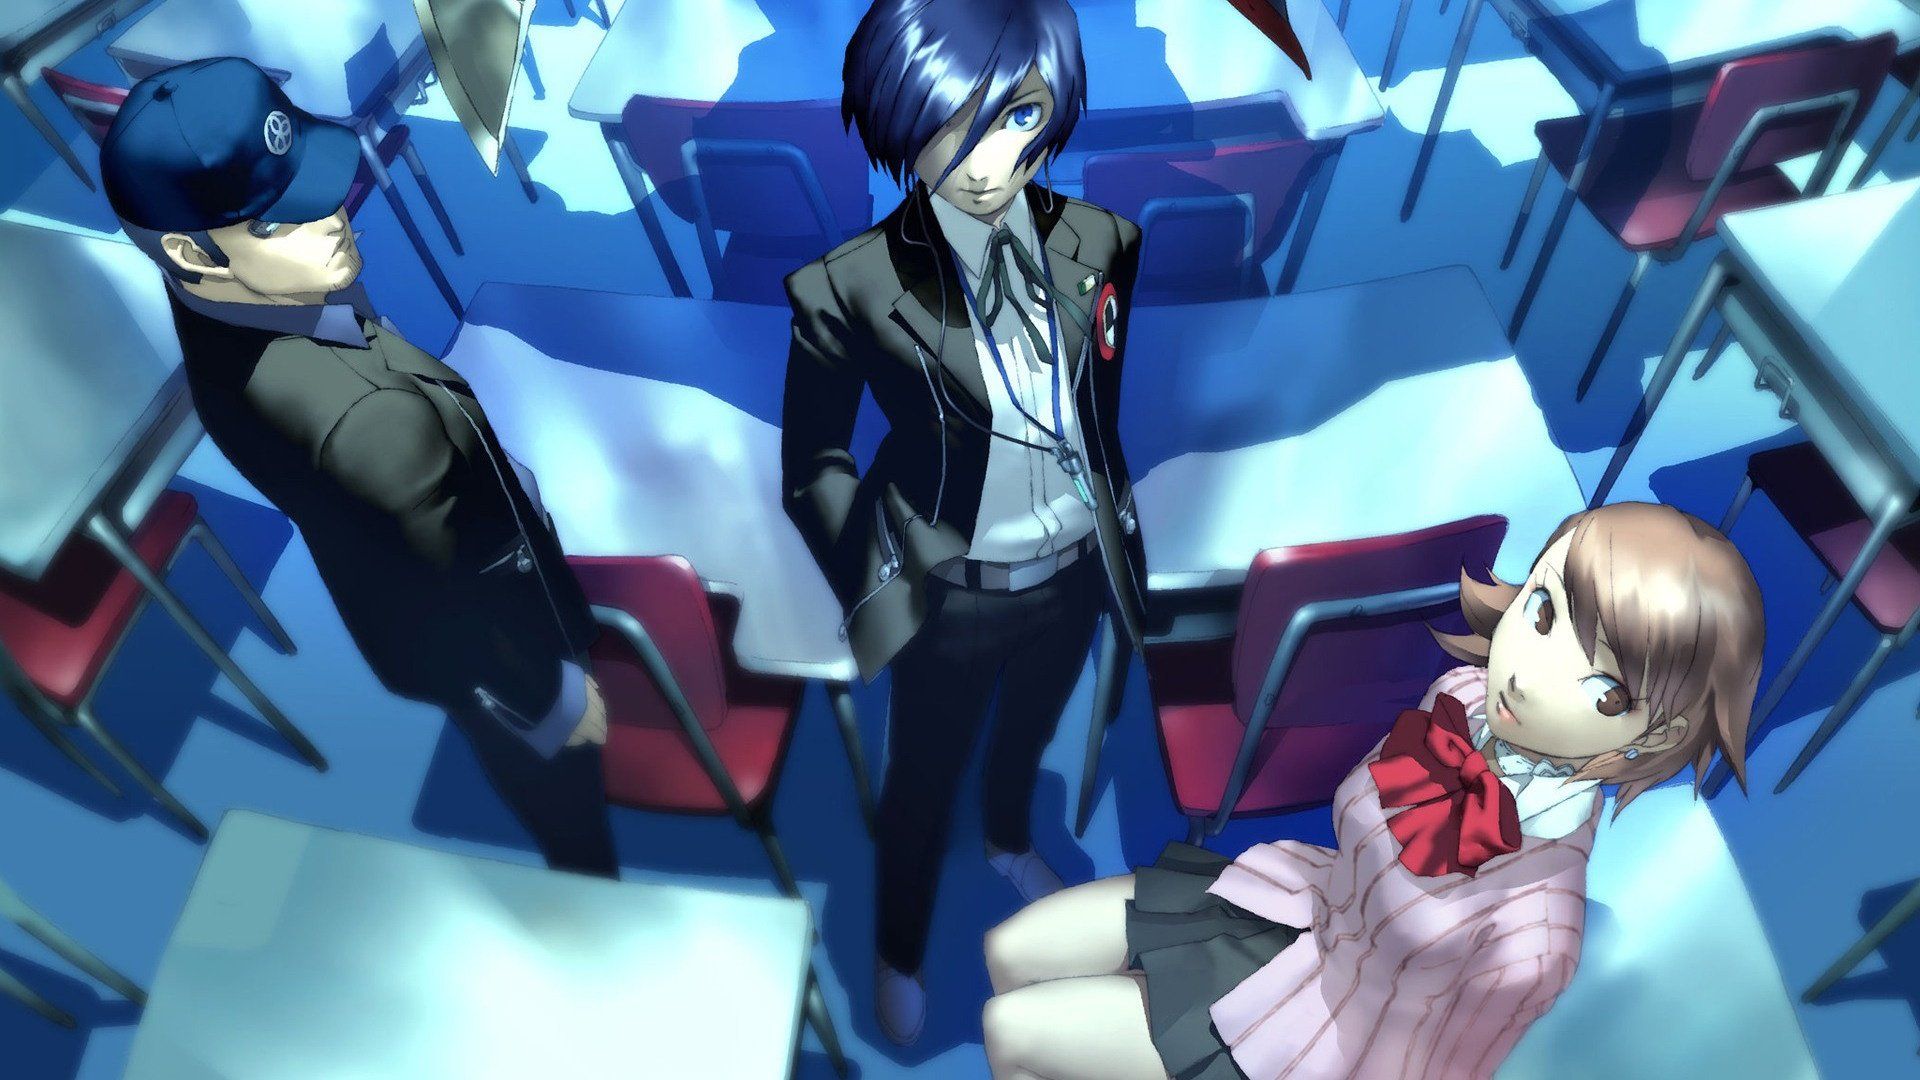 Atlus Will 'Actively Discuss' Bringing Persona 3 and Persona 4 to